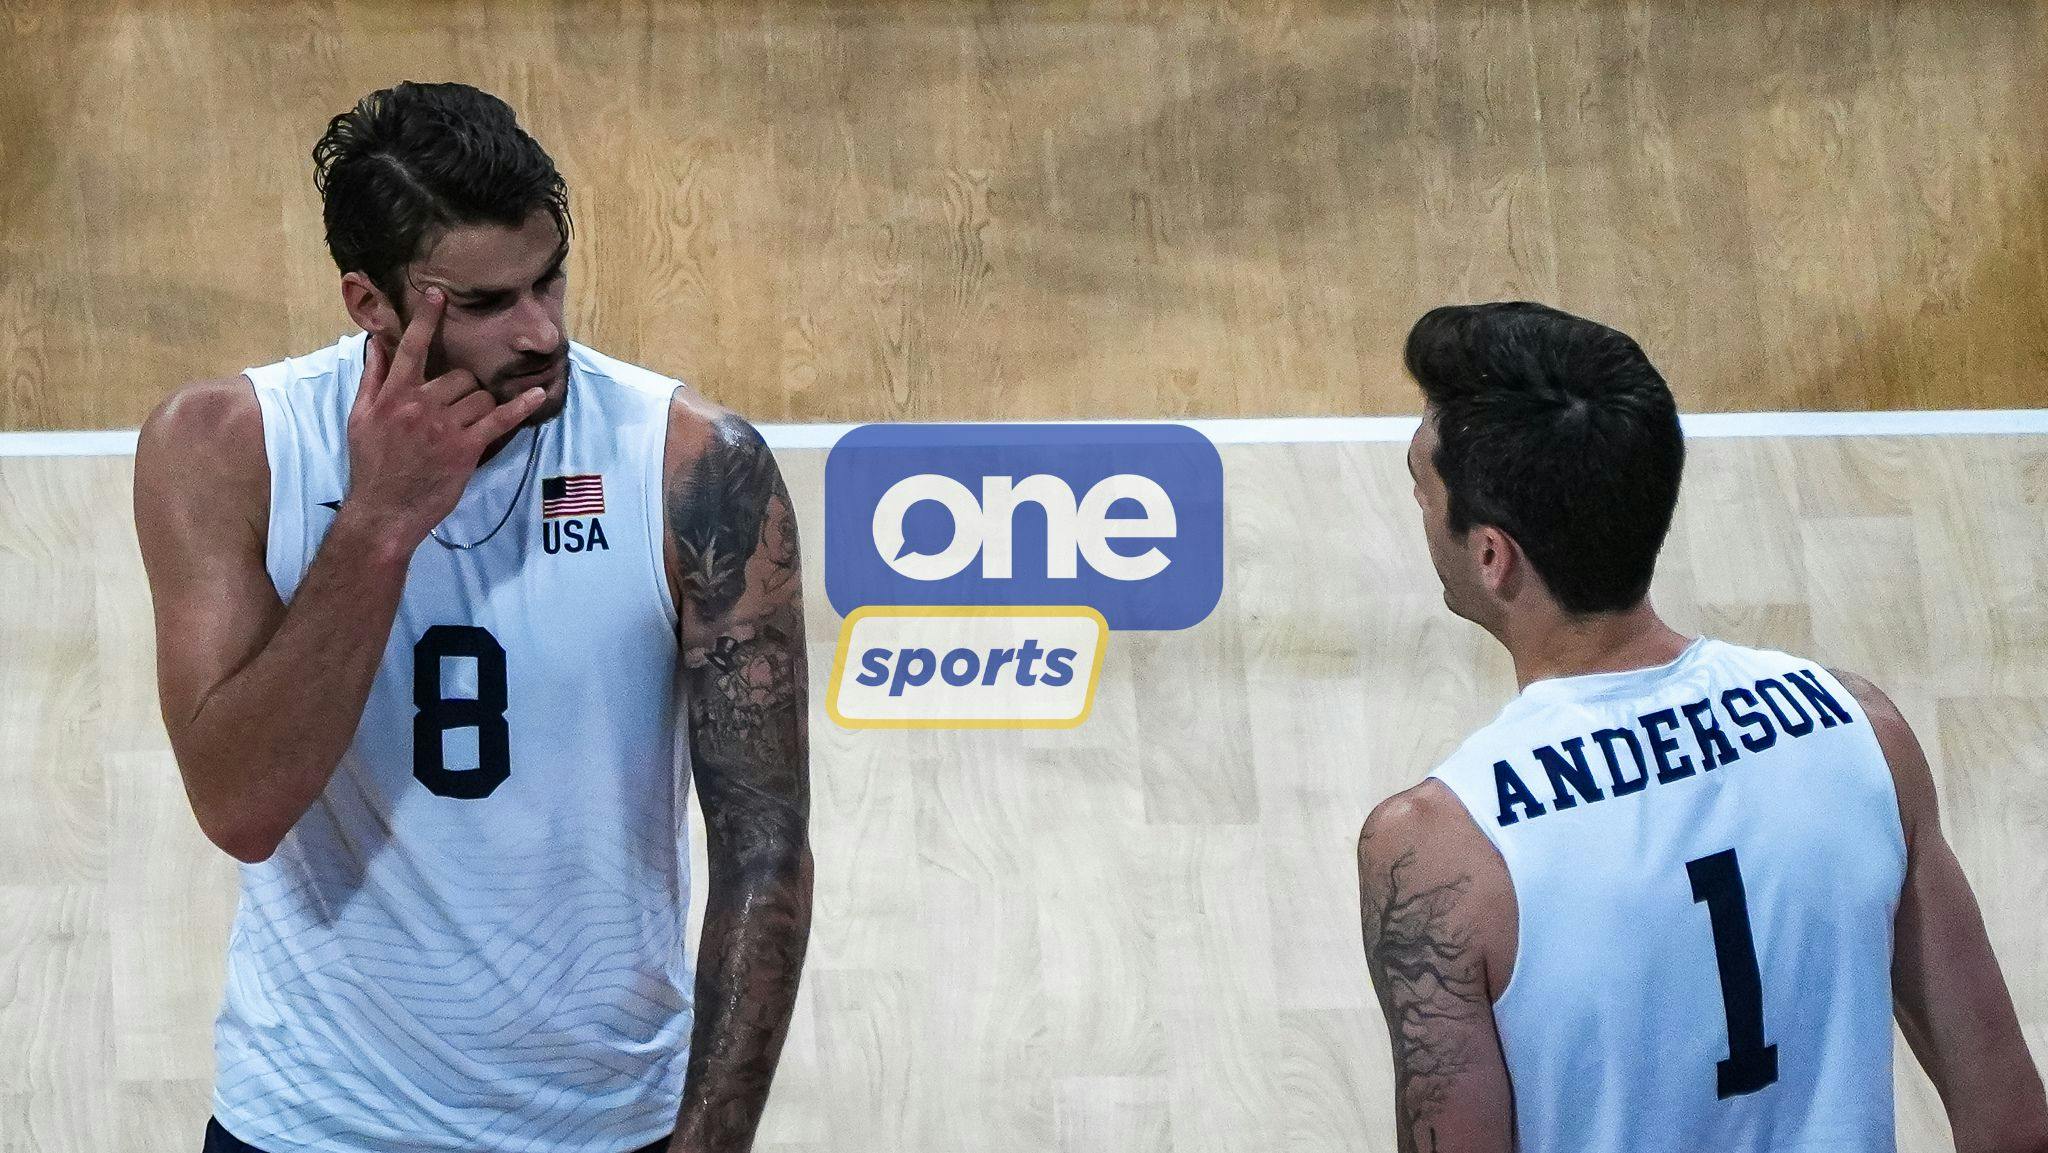 VNL: ‘It feels like home’ | USA’s TJ Defalco bares experience in Philippines
